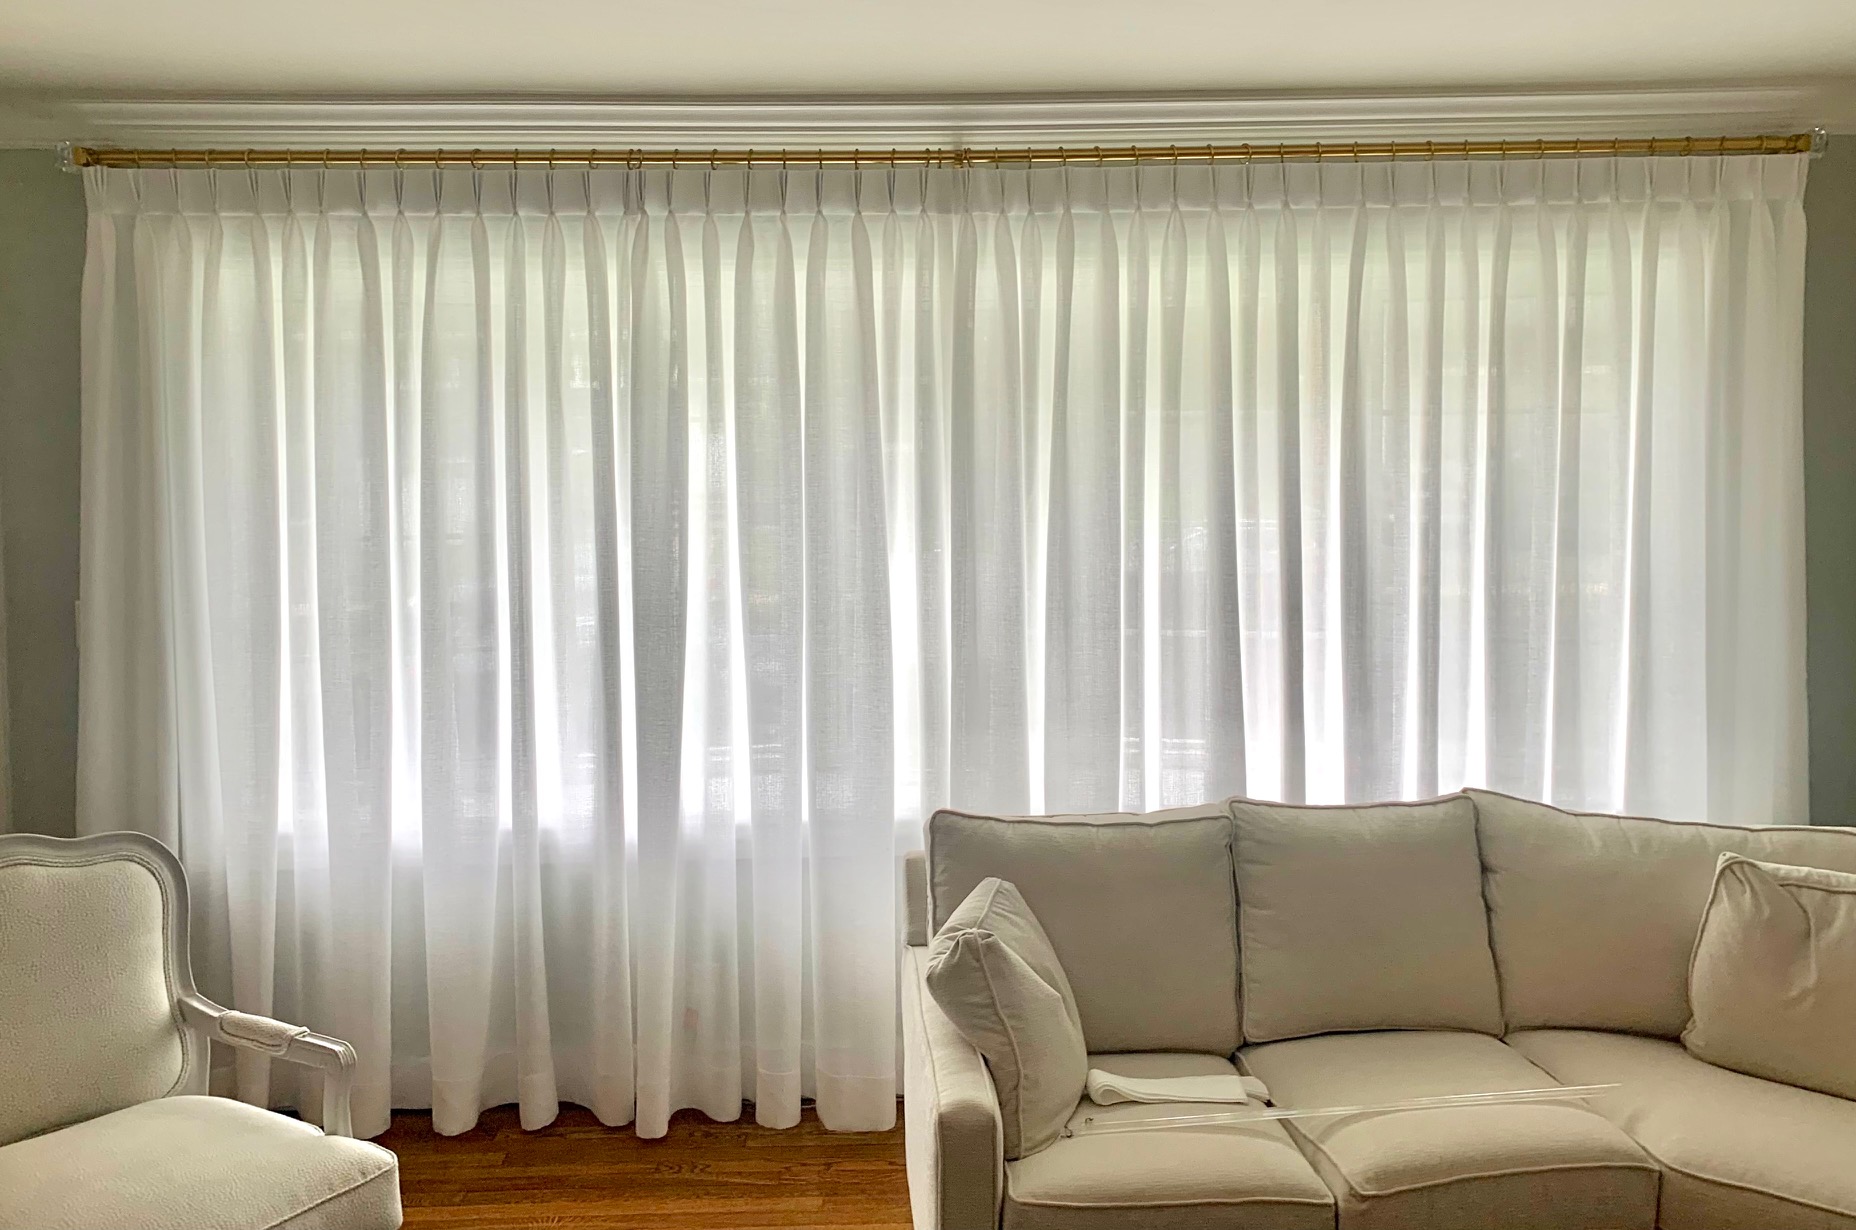 Wall of Linen Pinch Pleat Drapes on Gold TRAX Rod